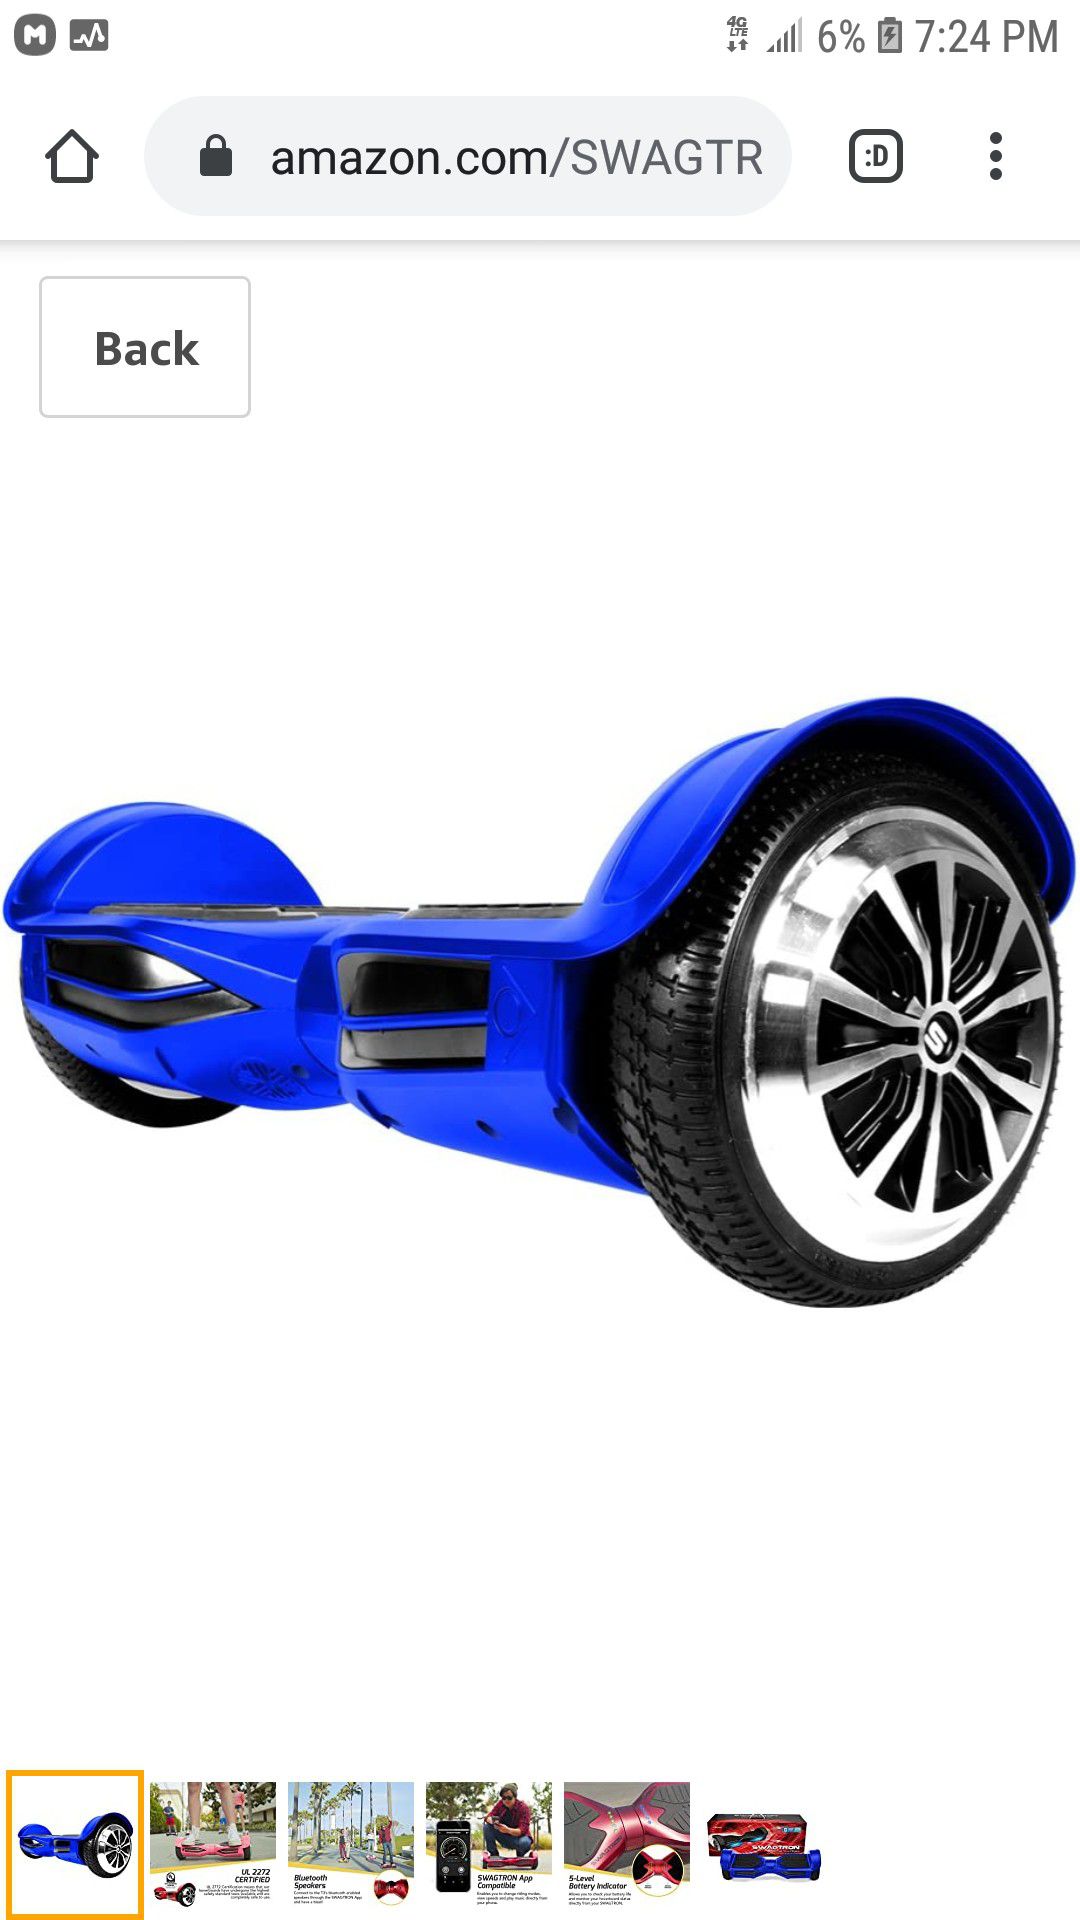 NEW Hoverboard – Bluetooth Speaker with backpack